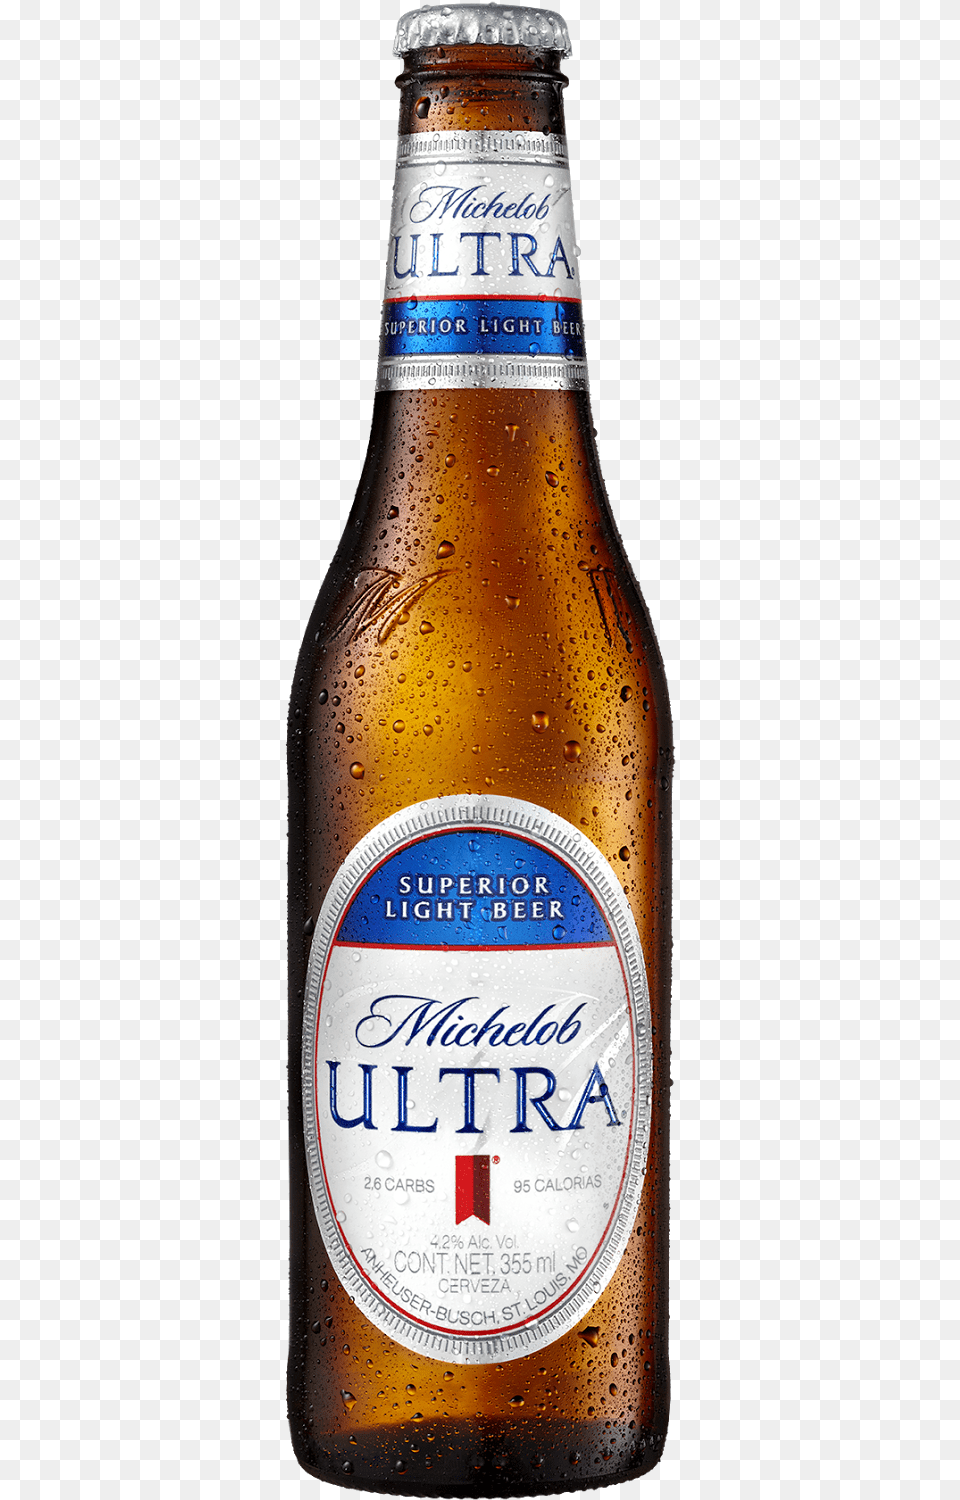 Con Slo 95 Caloras Y Michelob Ultra, Alcohol, Beer, Beer Bottle, Beverage Free Png Download